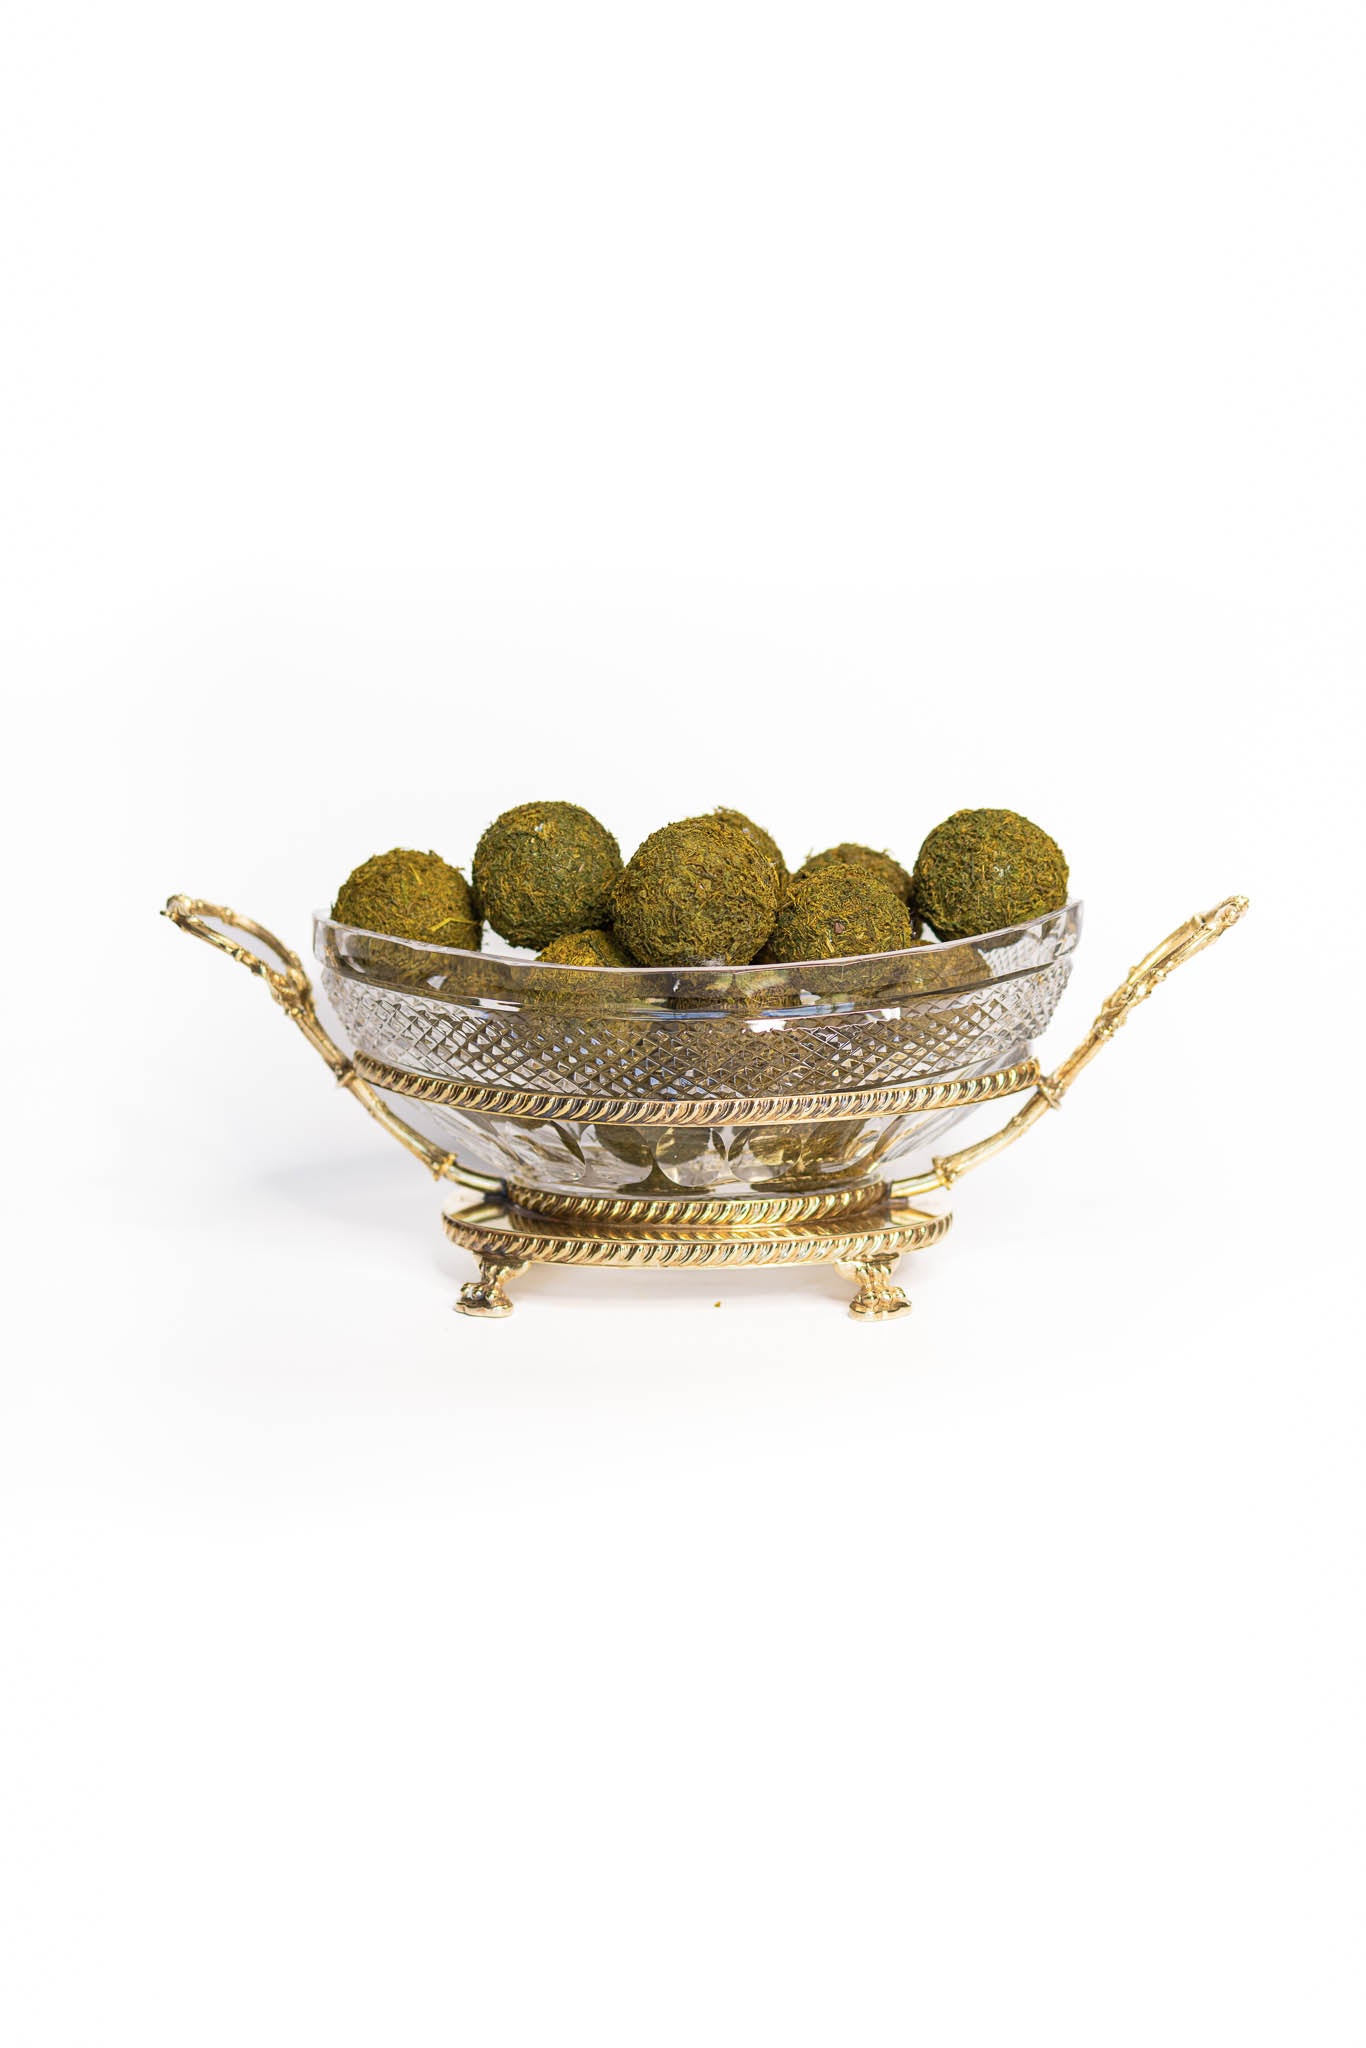 Circa 1900 Large Brass and Crystal French Centerpiece